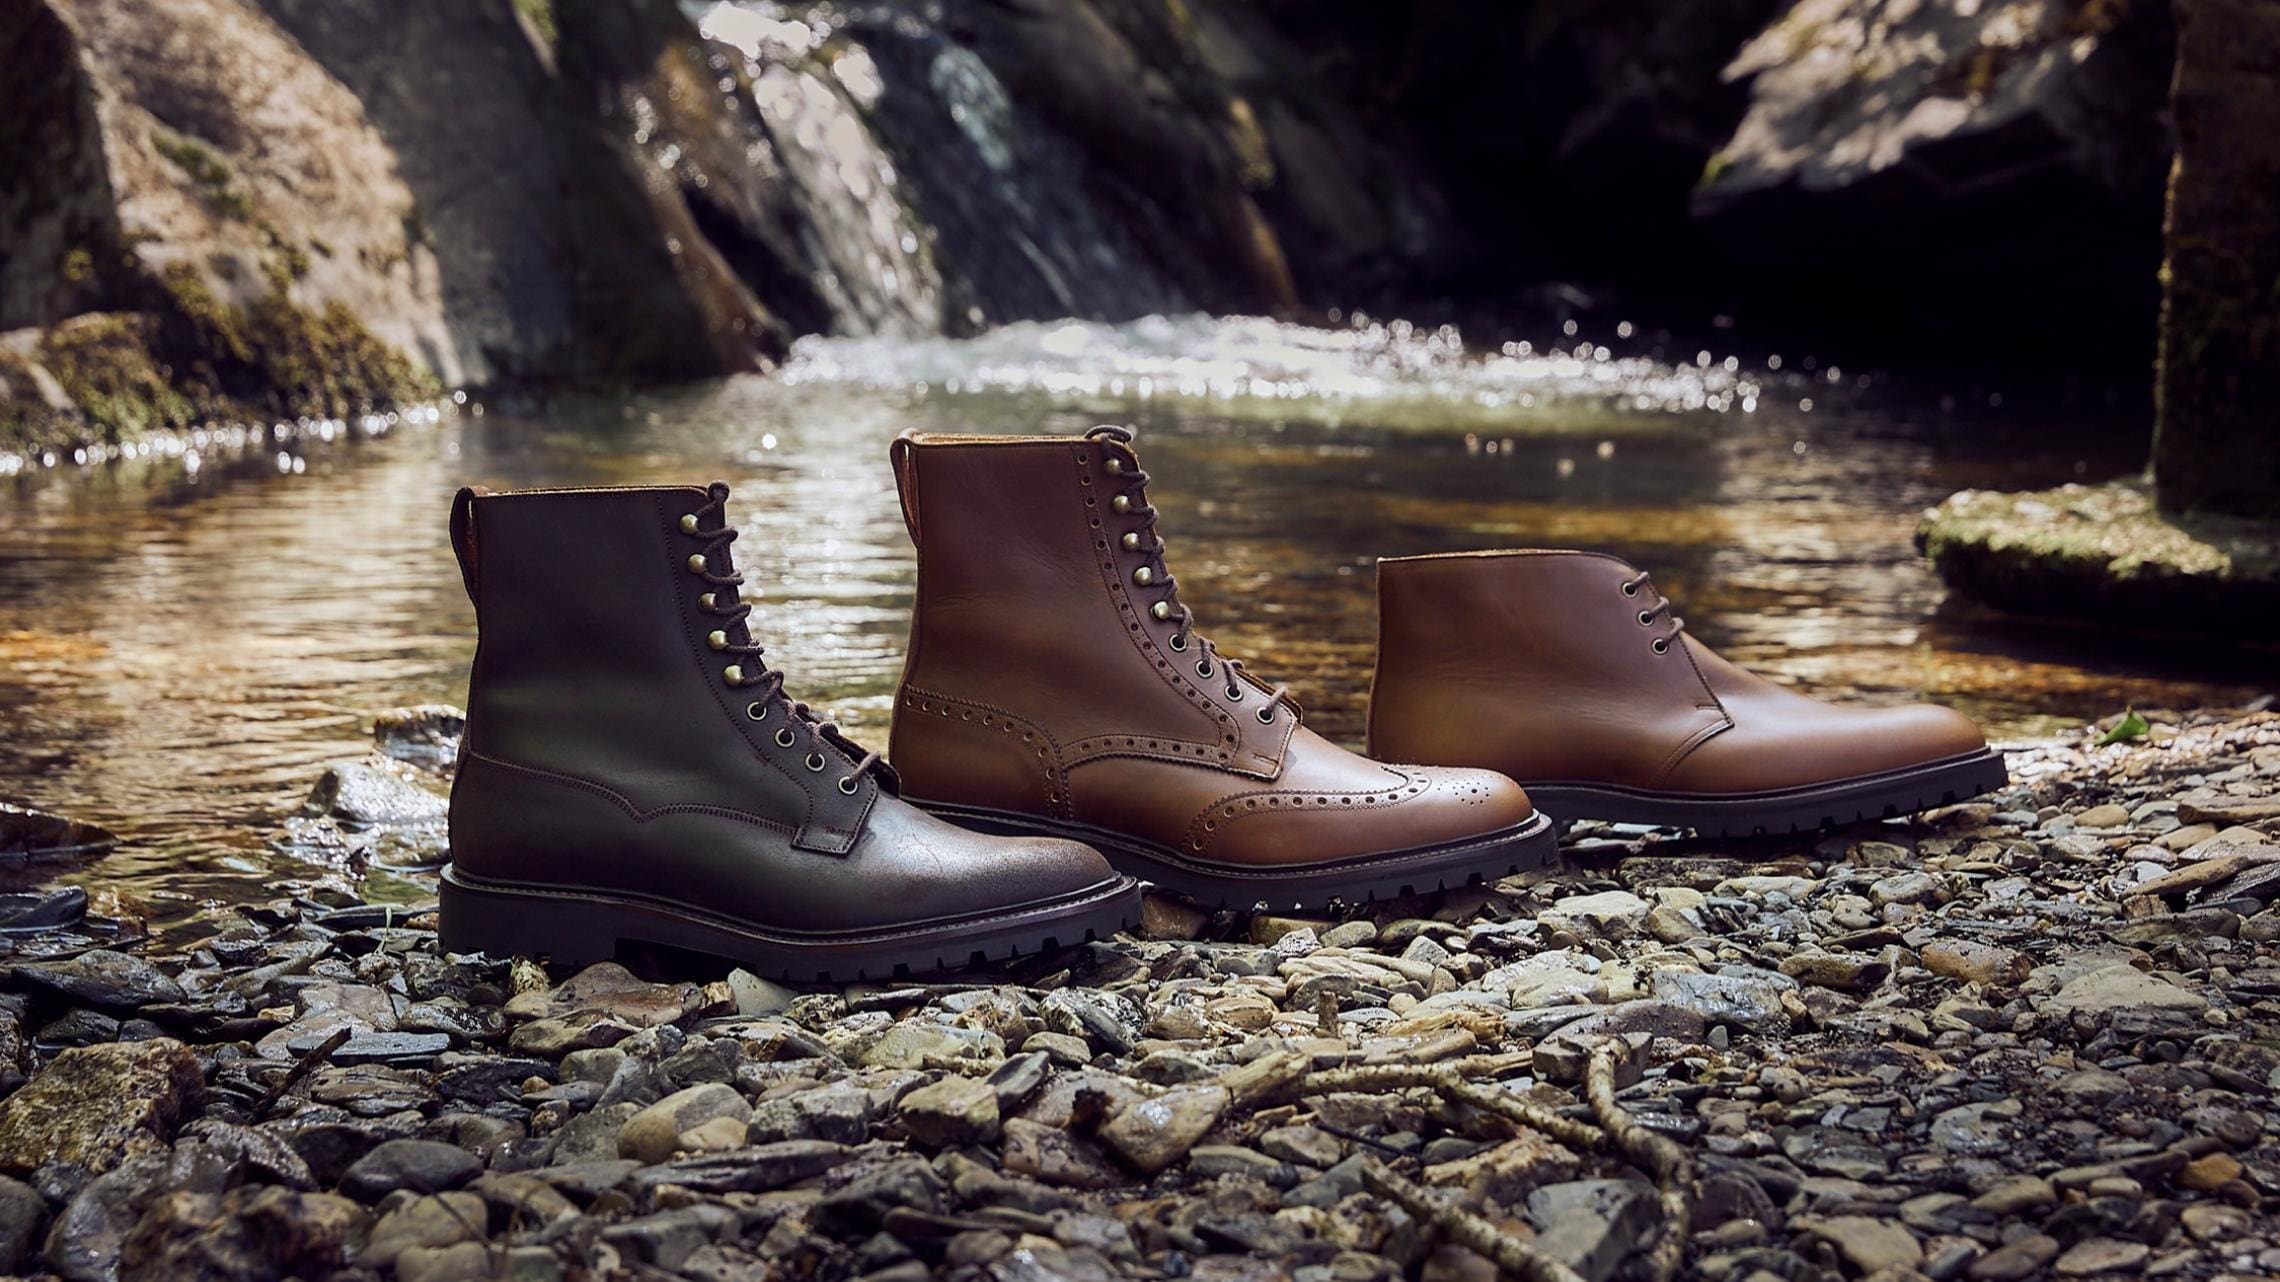 Crockett  Jones has just unveiled the only boots you'll need this winter –  Luxury London